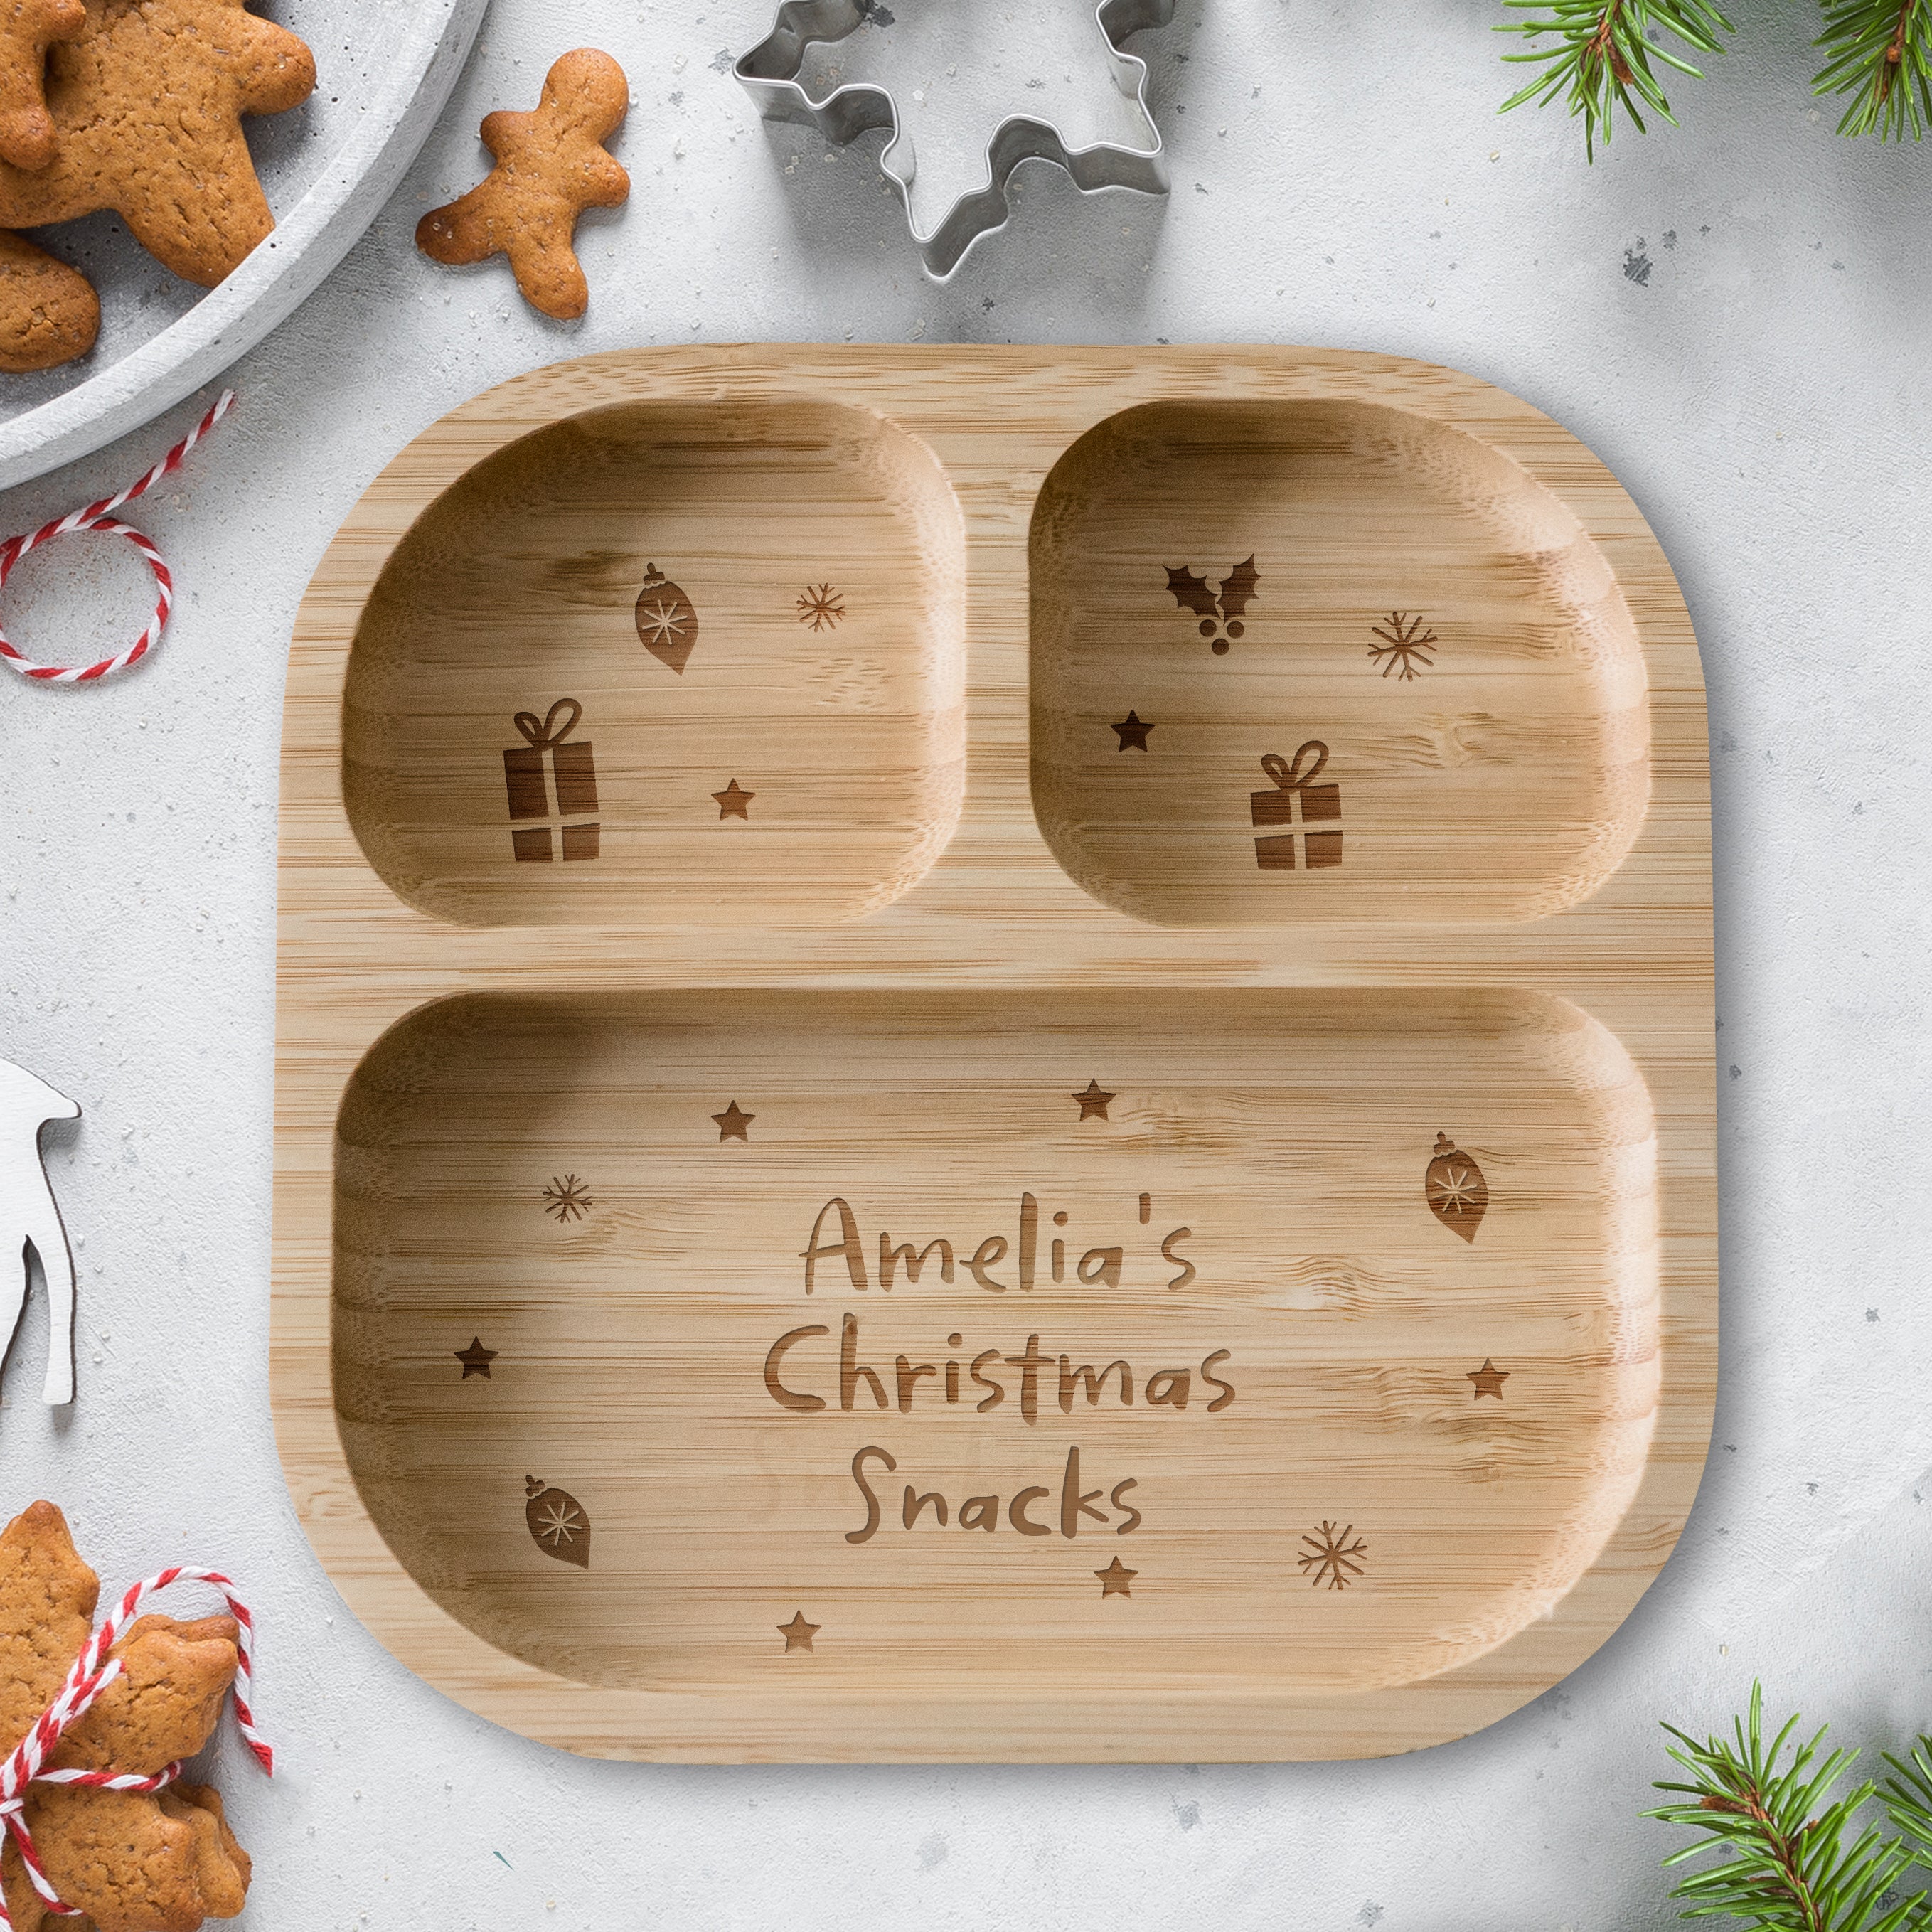 Personalised Christmas Dinner Bamboo Suction Plate